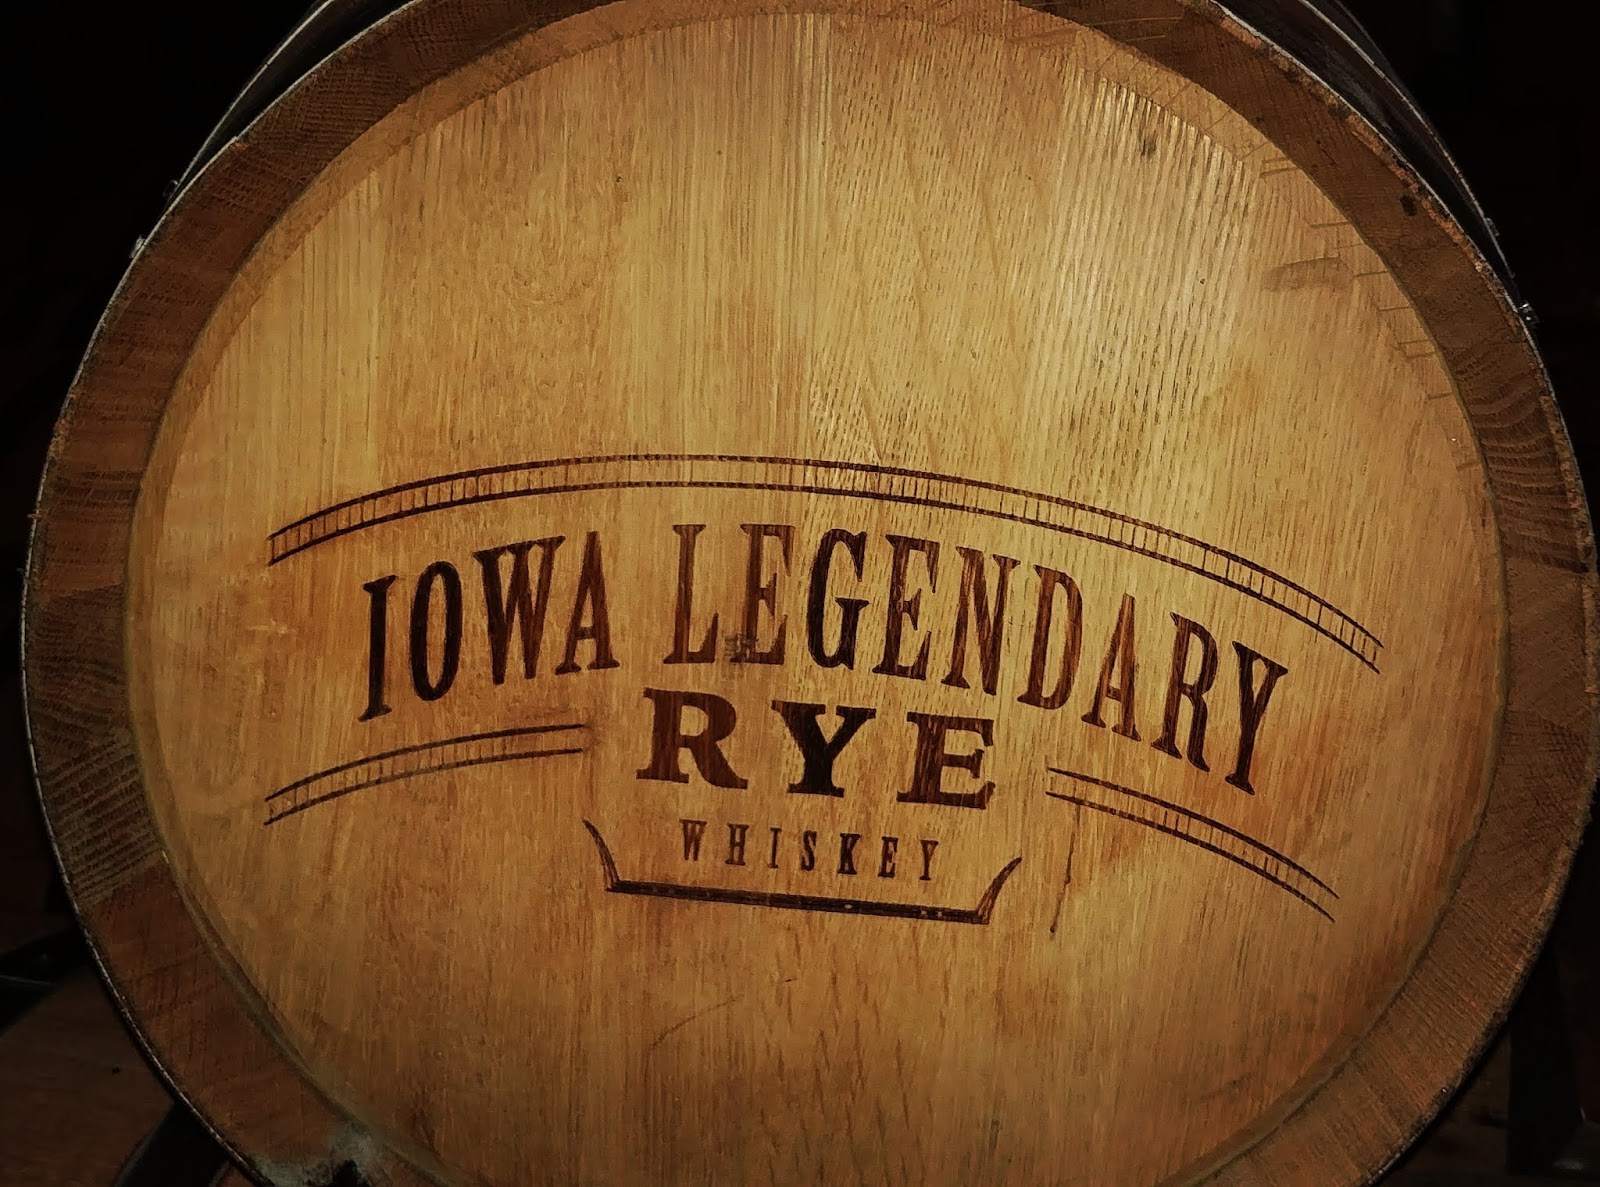 Iowa Legendary Aged Rye Whiskey Review - The Whiskey Reviewer